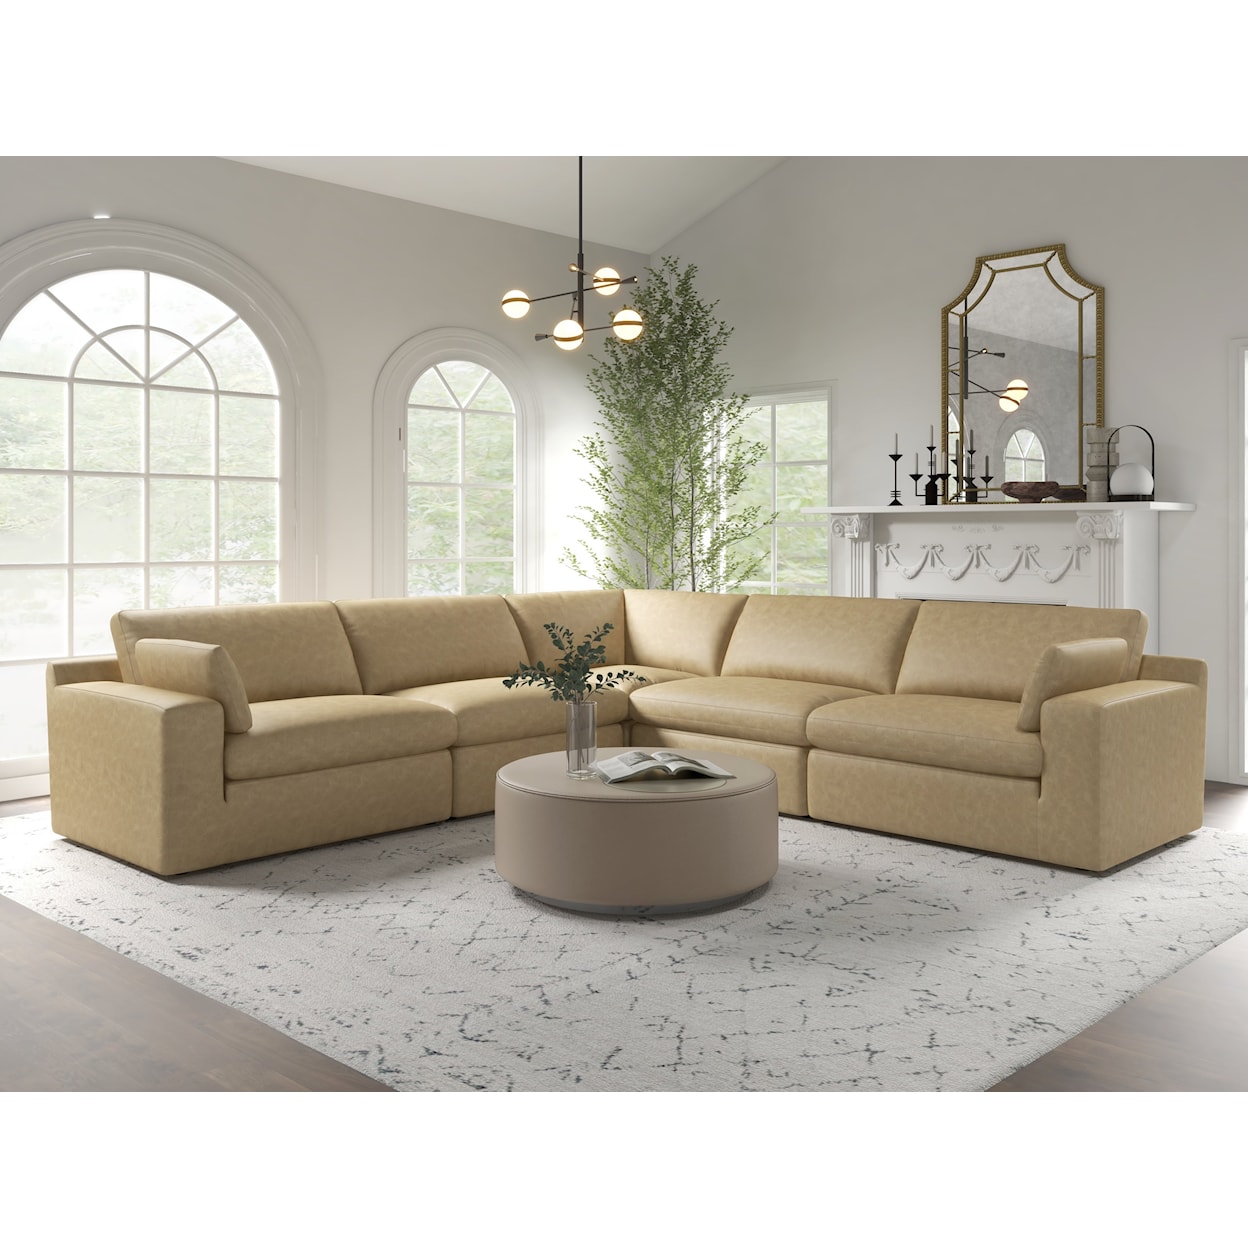 Kuka Home KF1091 5 Piece Faux Leather Sectional with Ottoman